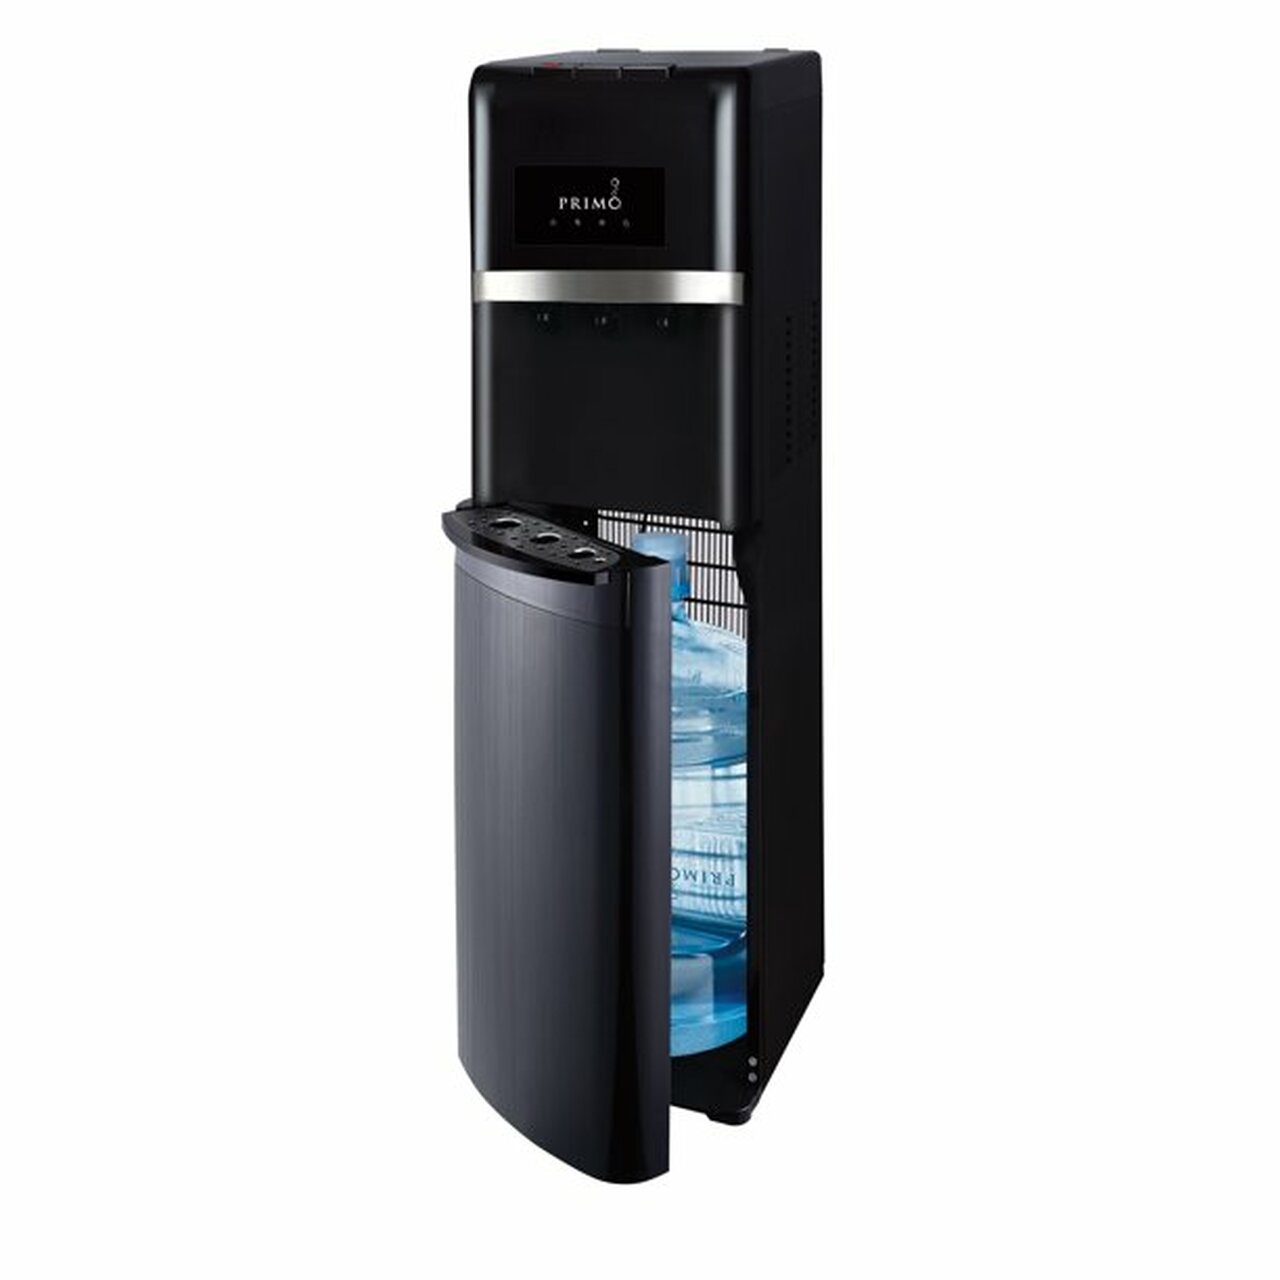 Primo Bottom Loading Water Dispenser with Self-Cleaning Model # 601118